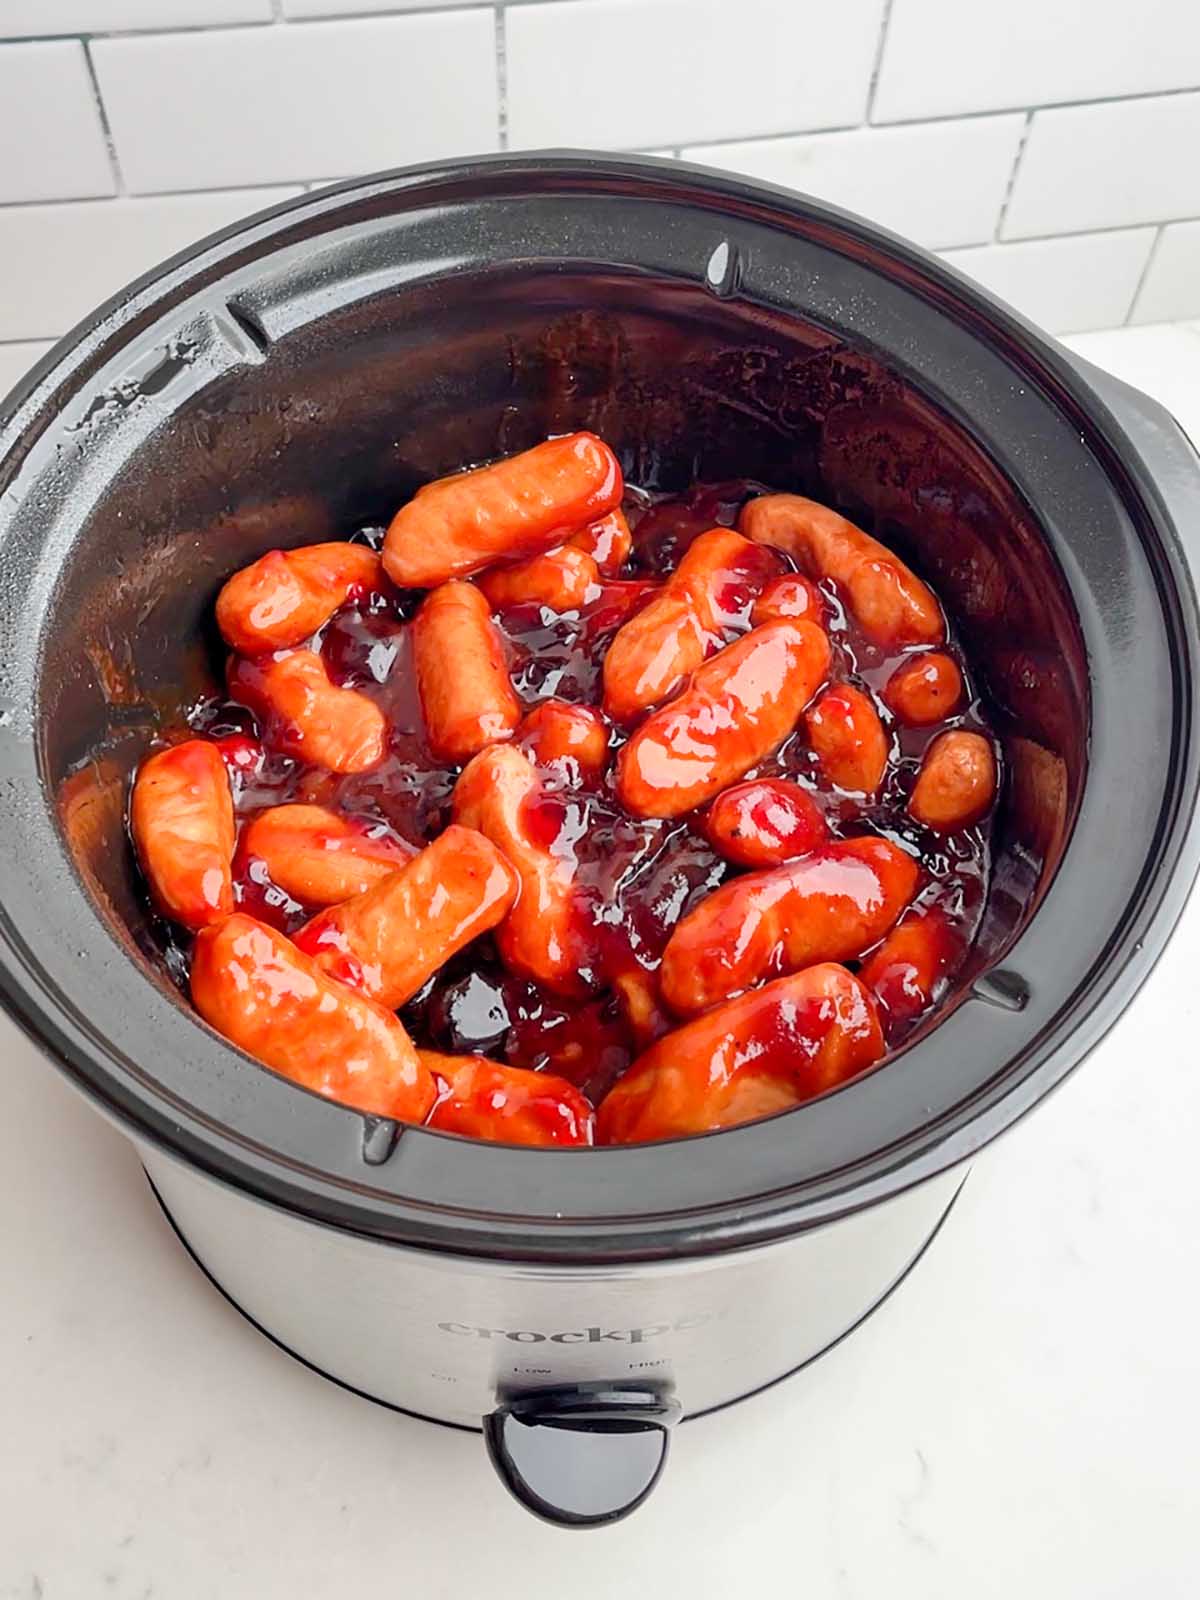 lil smokies with grape jelly and BBQ sauce in a crock pot.